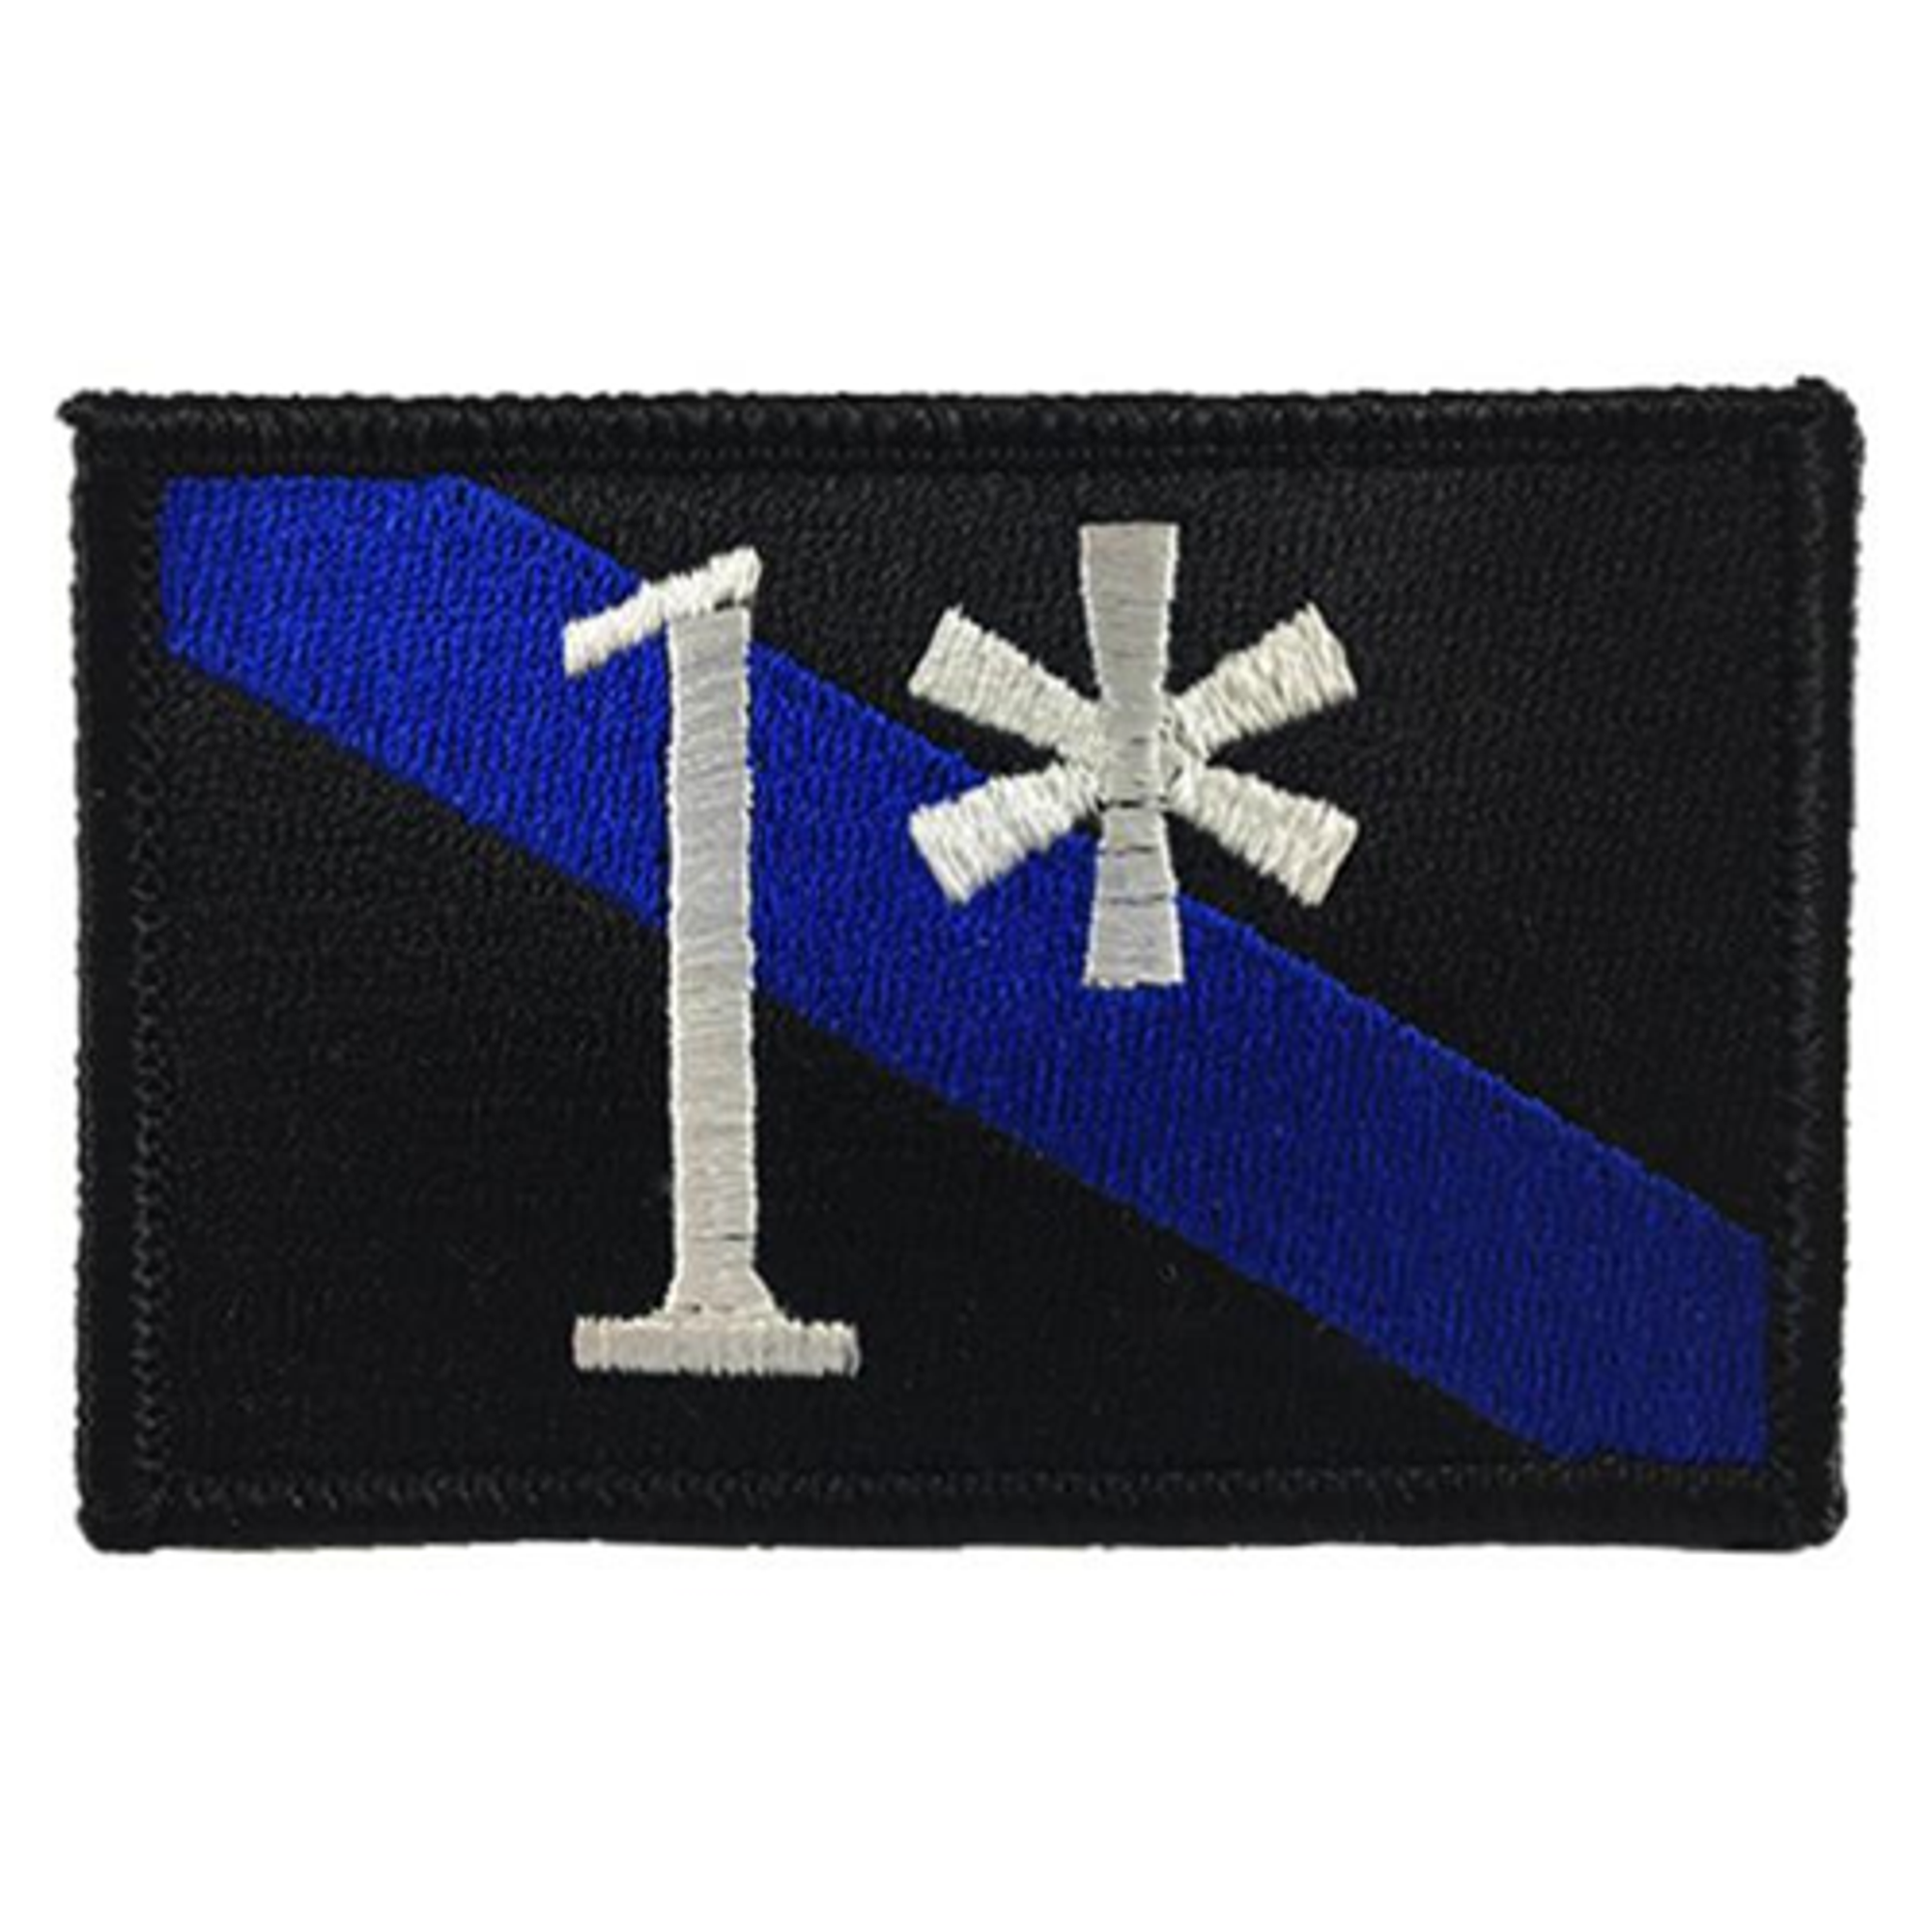 1 Asterisk - Thin Blue Line, 2 X 3 Inches, Velcro